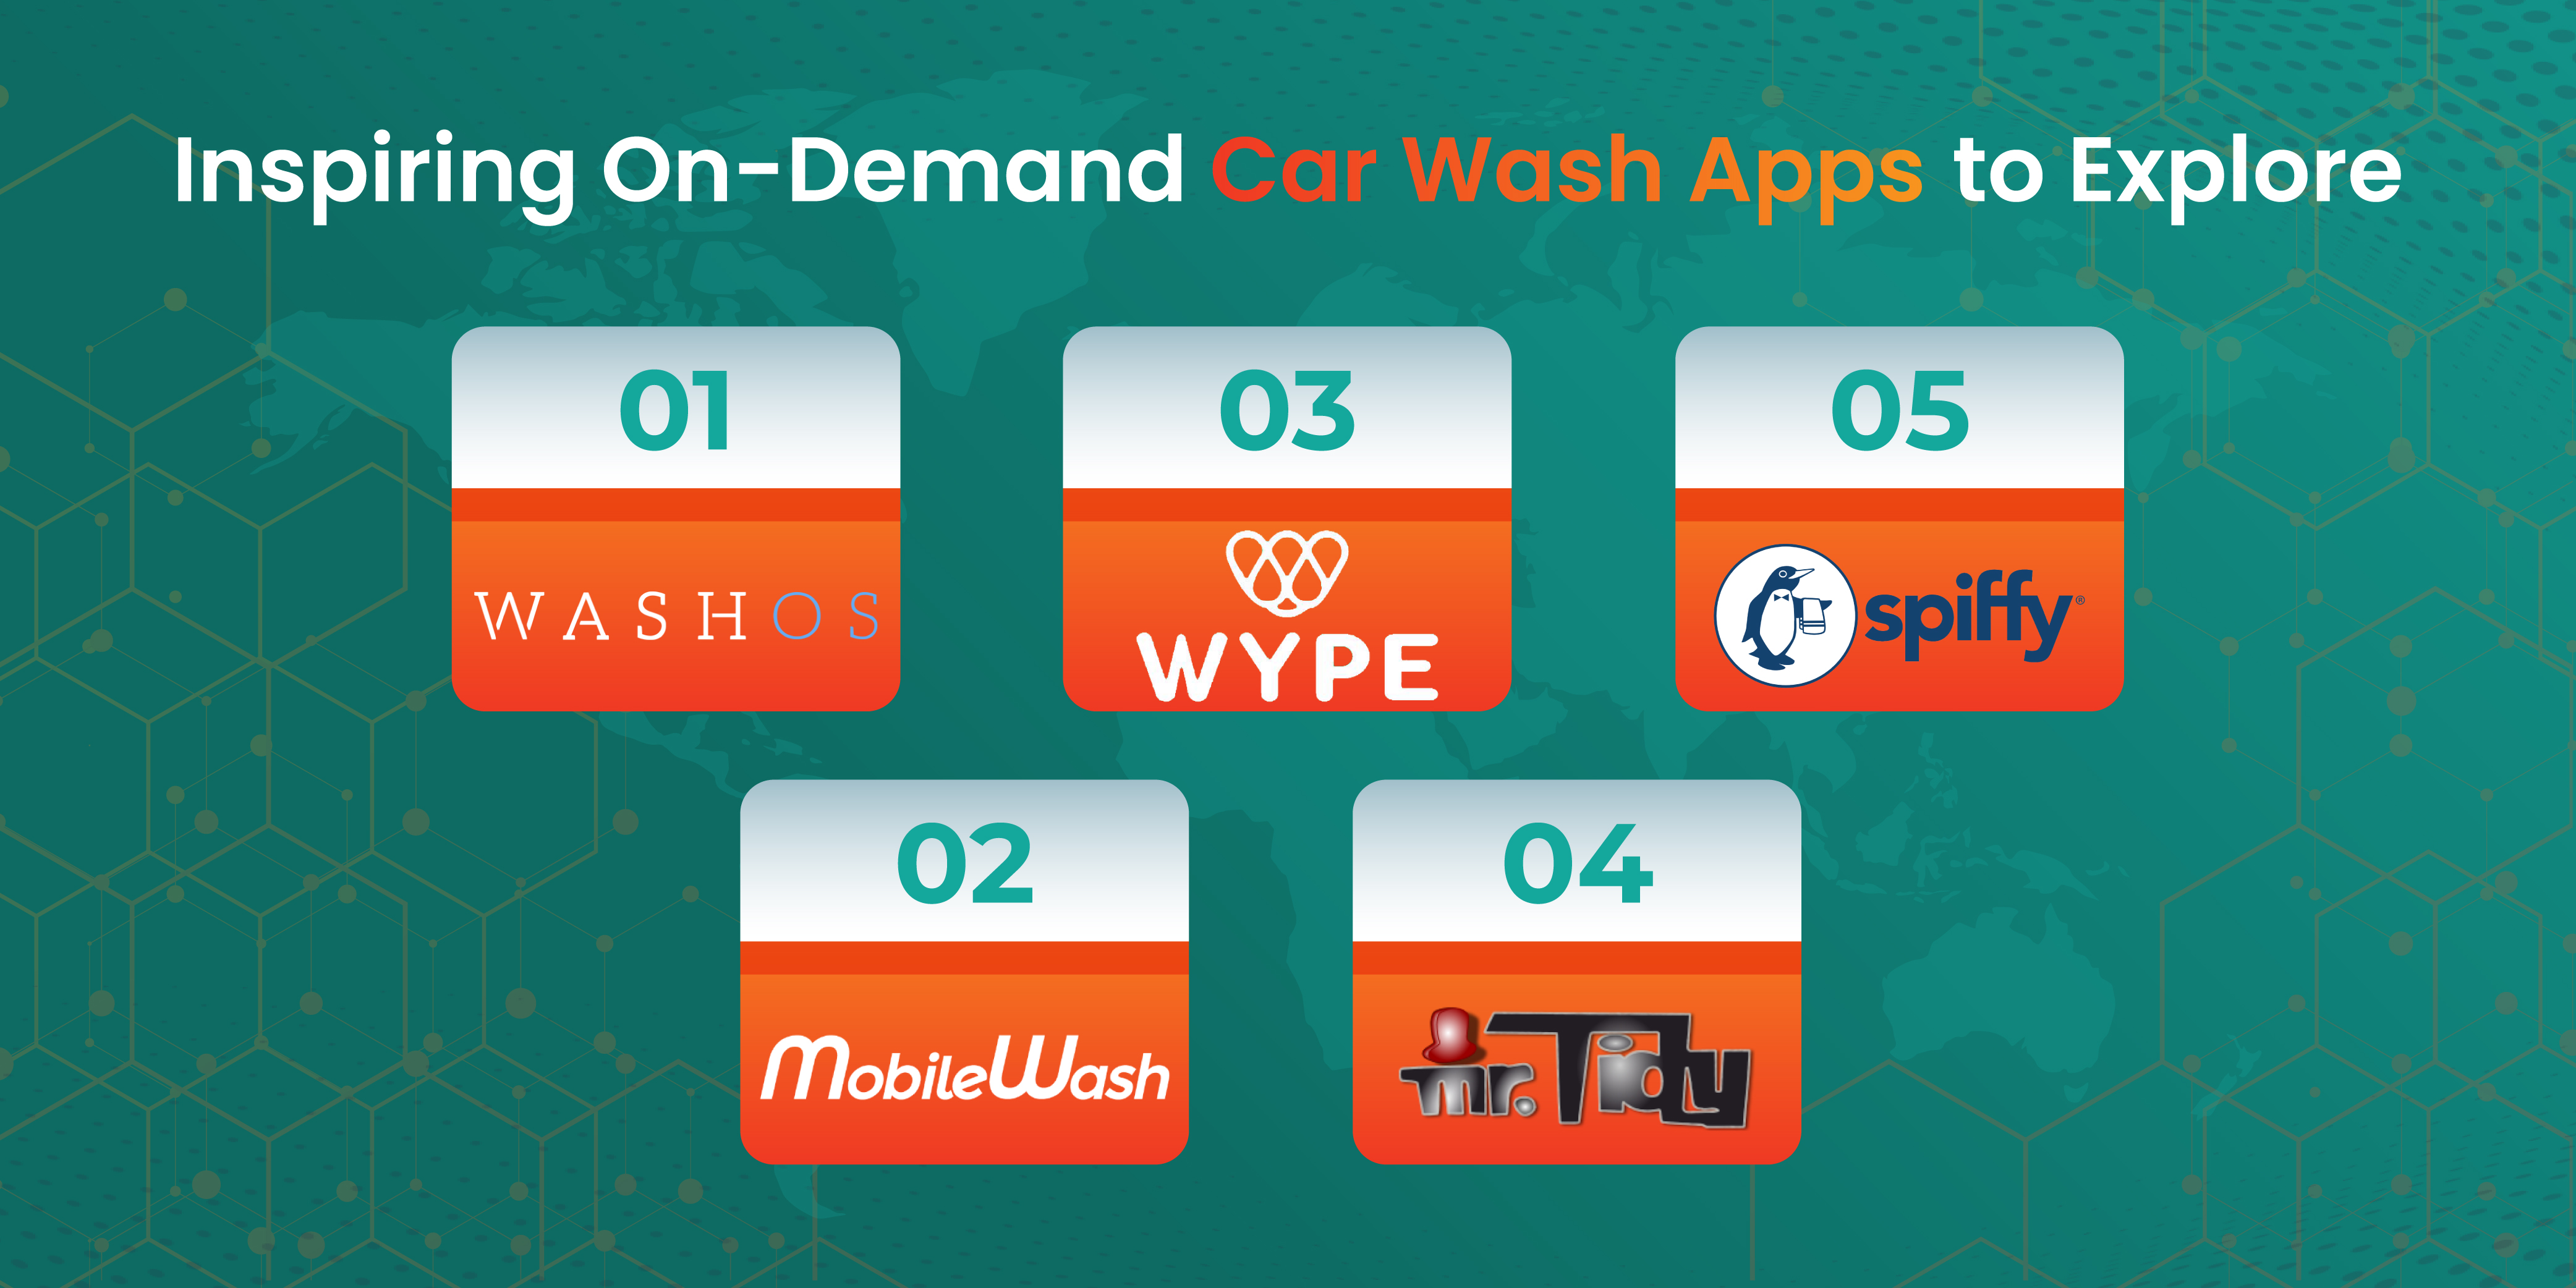 Top 5 Inspiring On-Demand Car Wash Apps to Explore